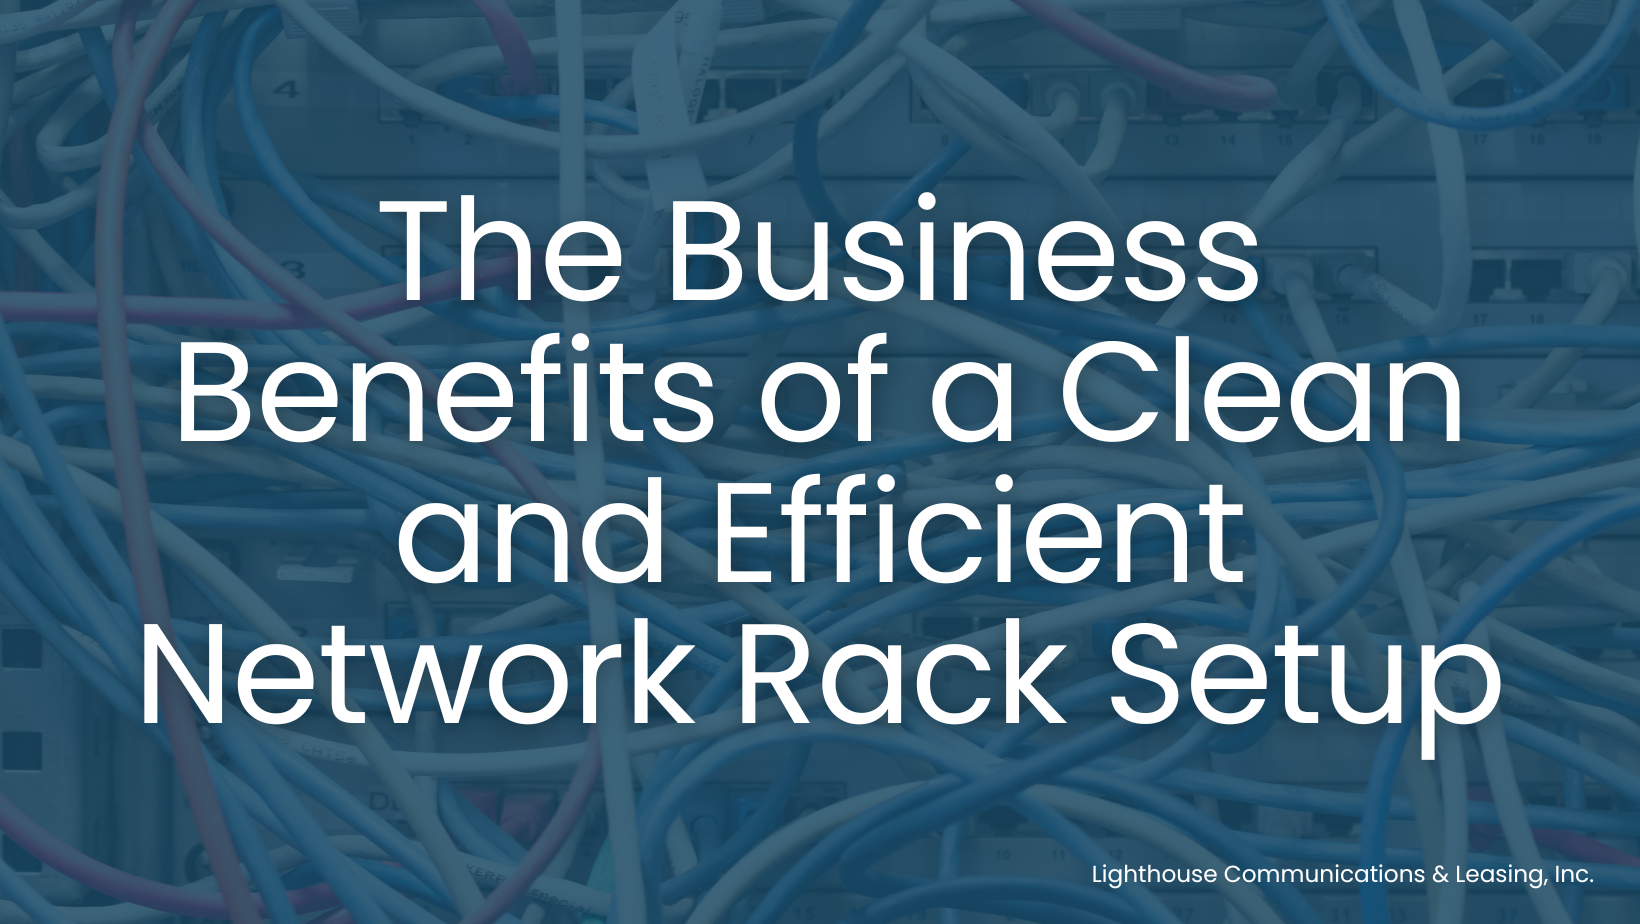 The Business Benefits of a Clean and Efficient Network Rack Setup